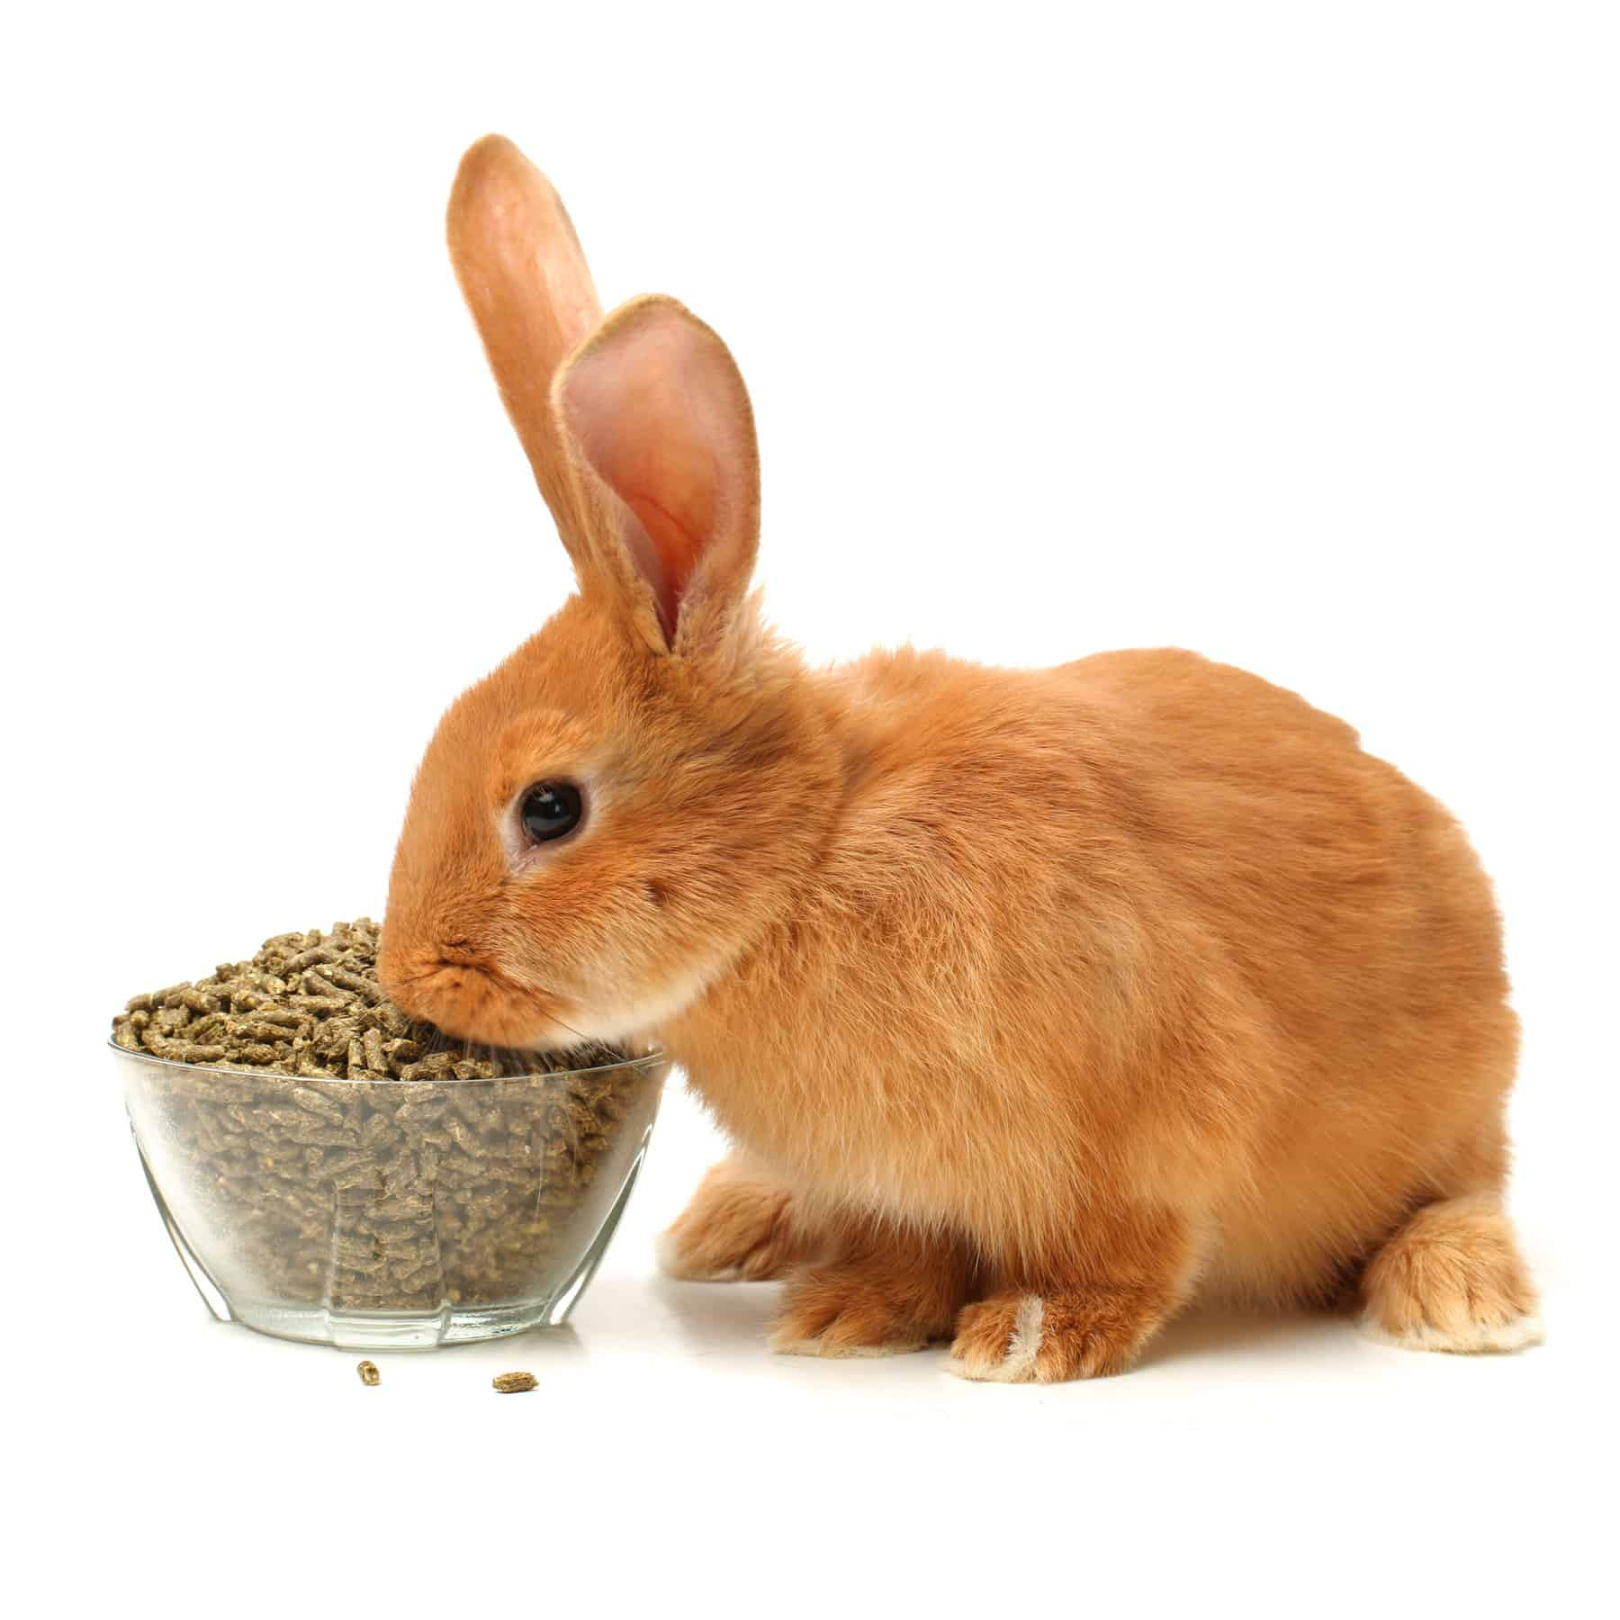 Can Rabbits Eat Cat Food? - Every Bunny Welcome